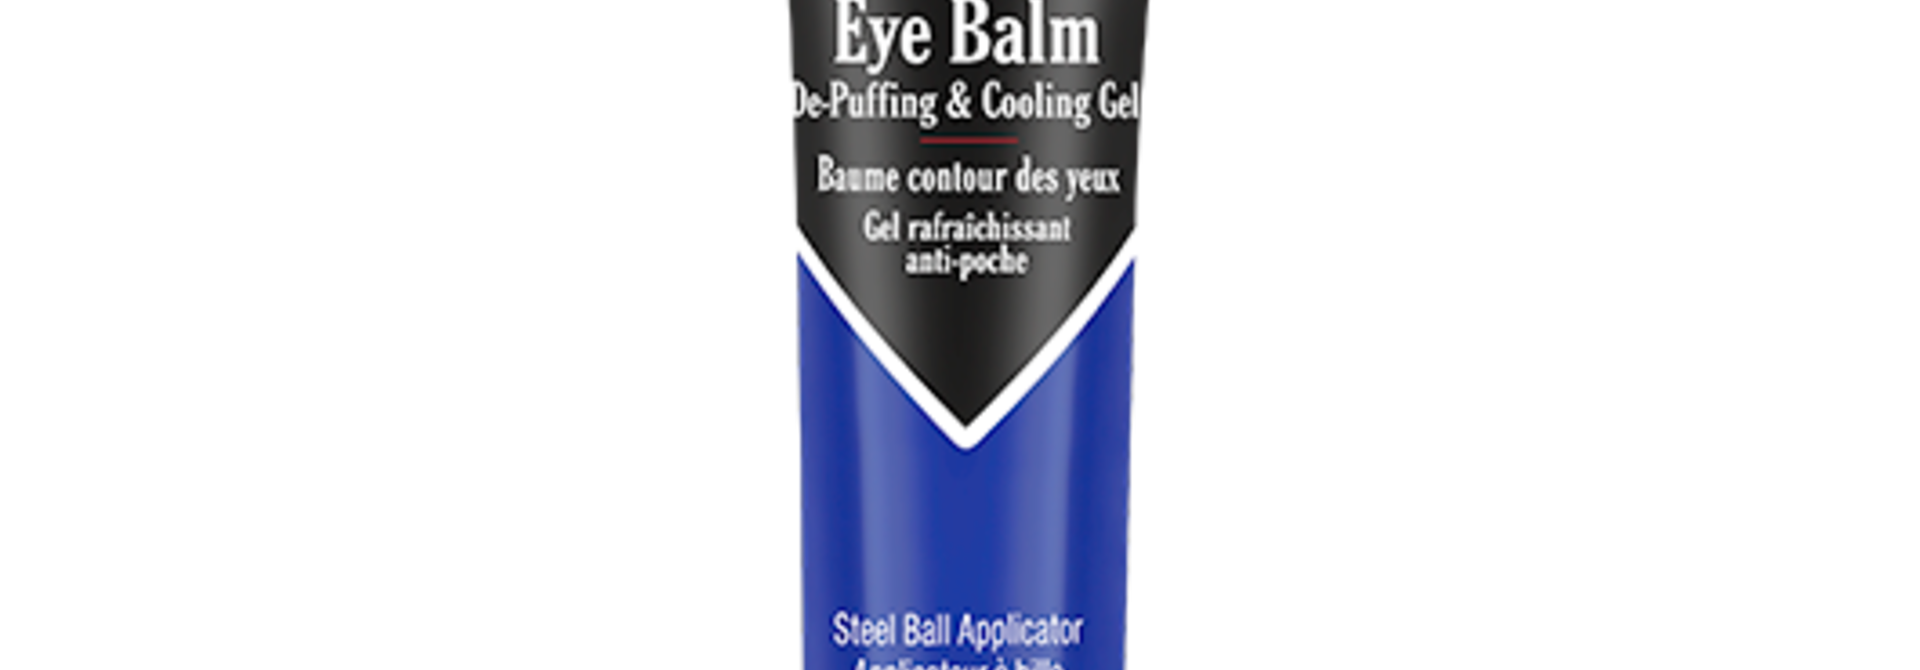 Eye Balm De-Puffing & Cooling Gel | The Facial Skincare Collection